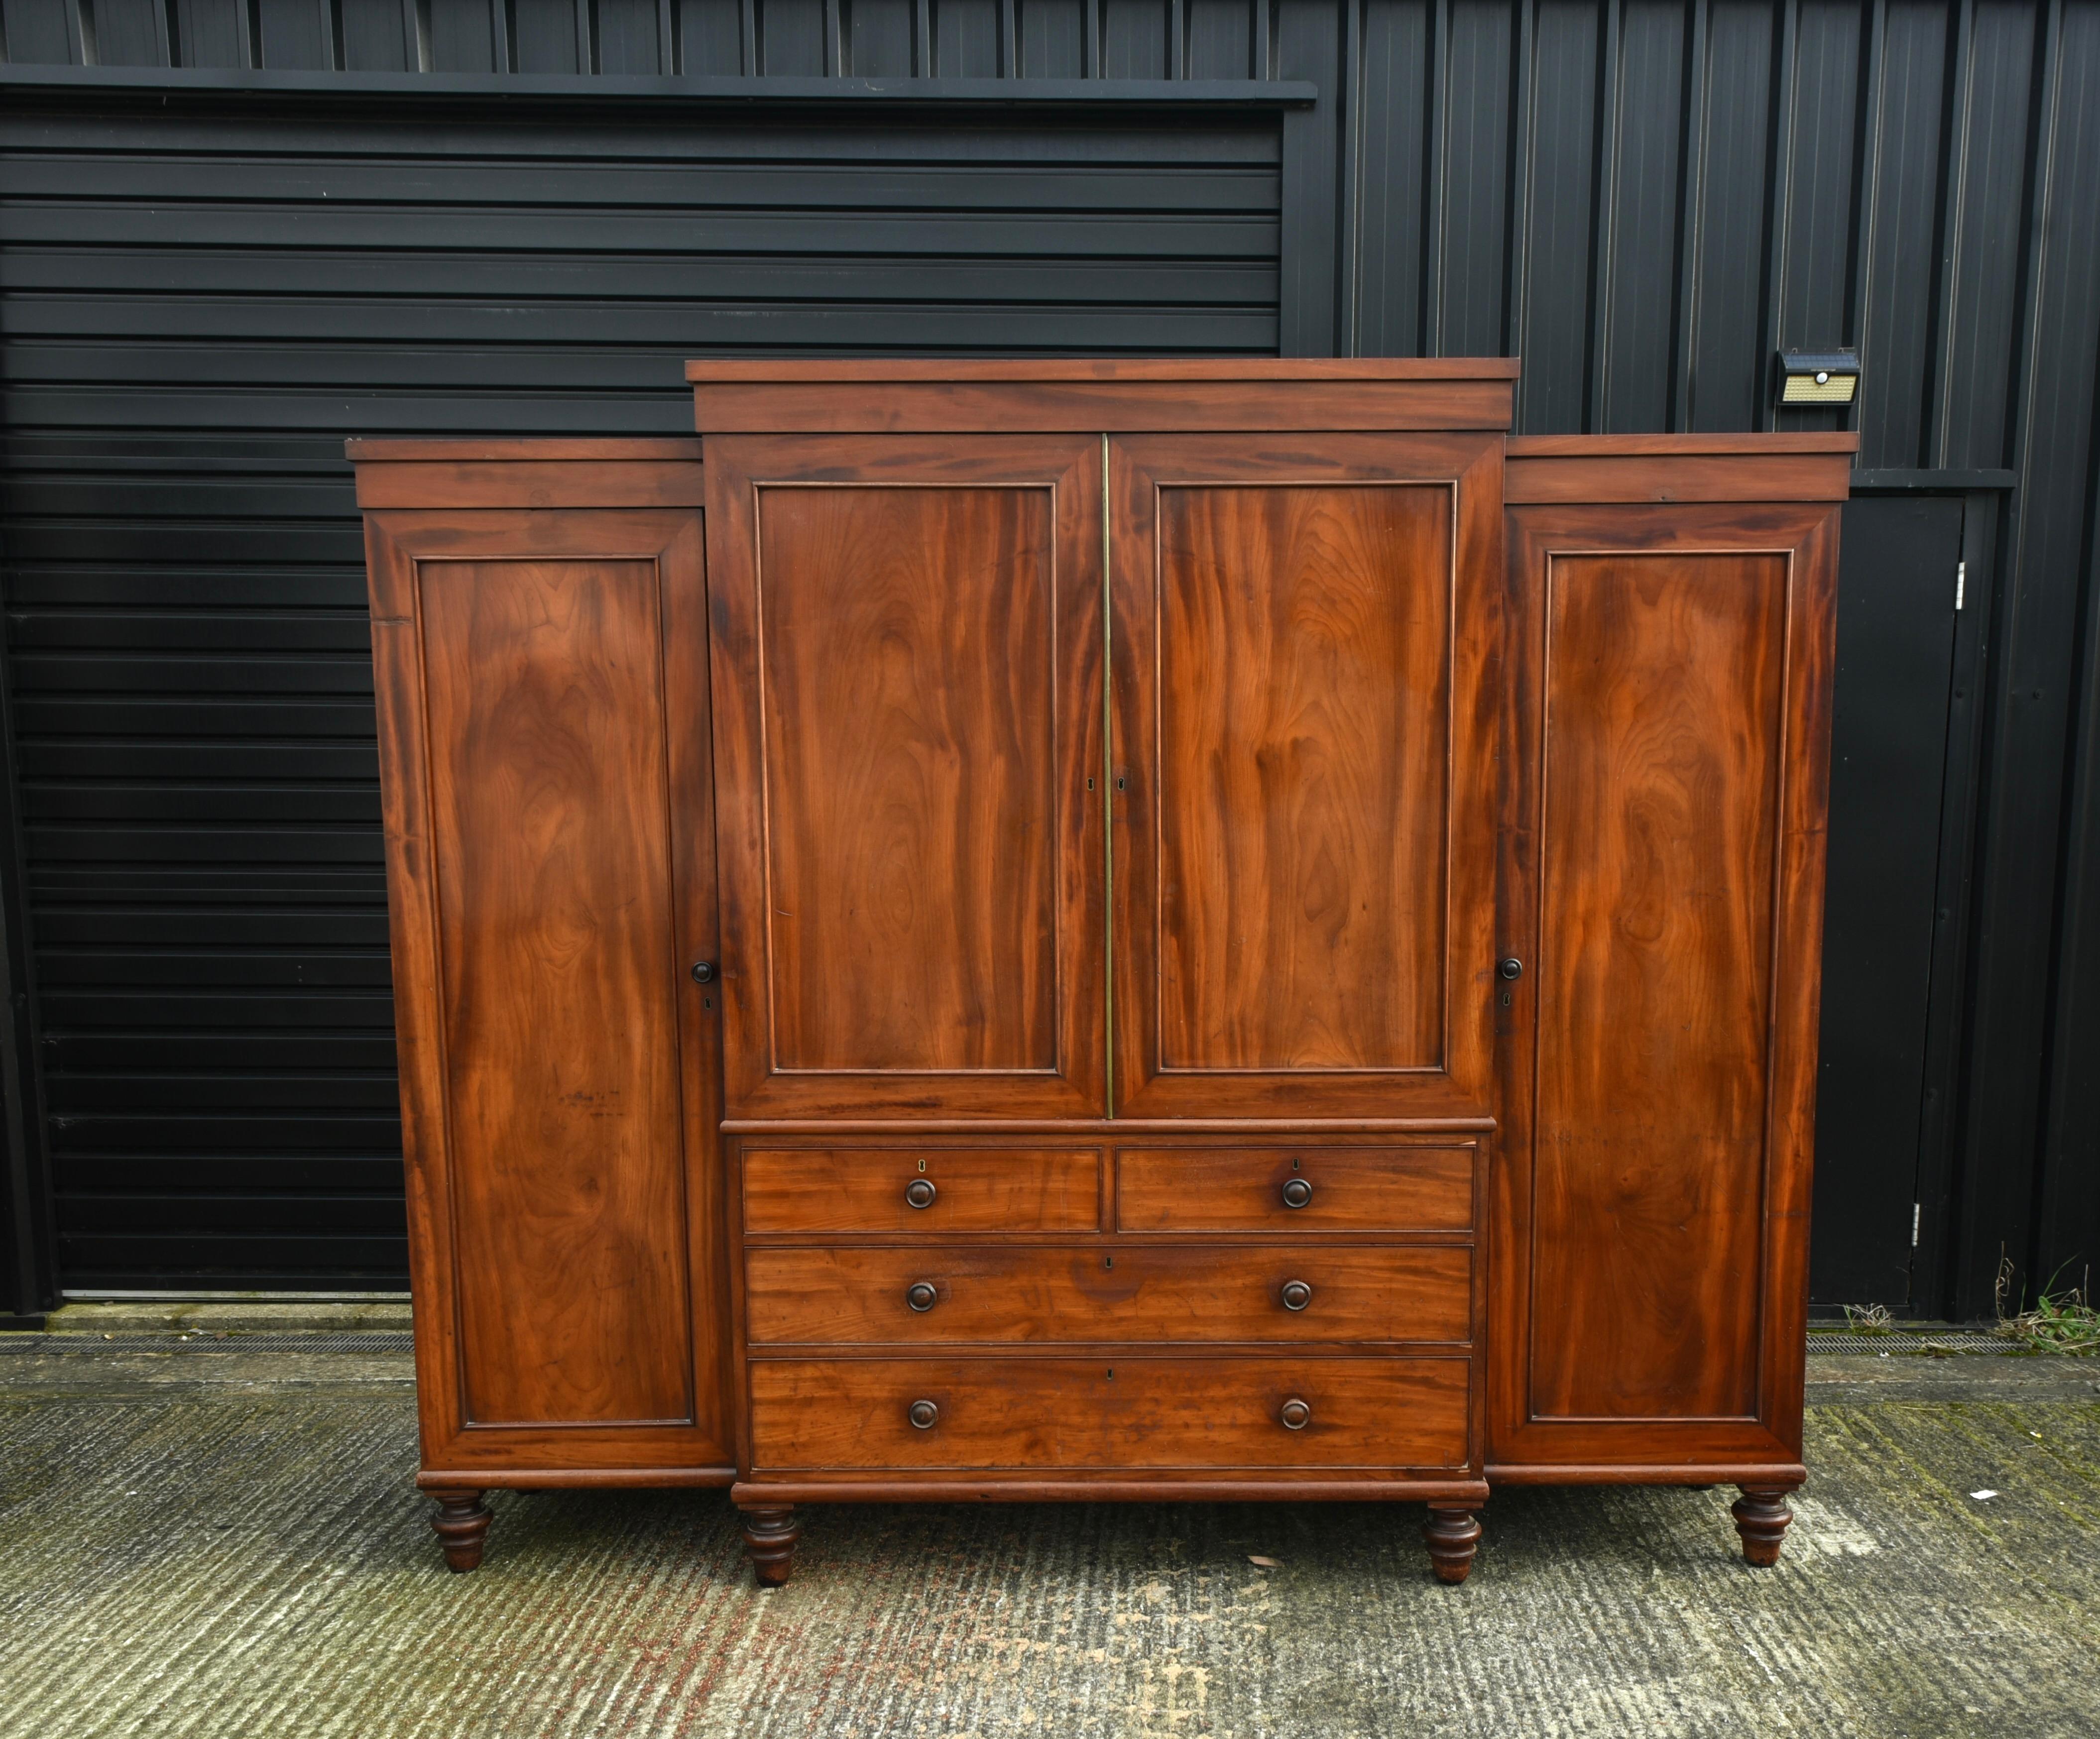 Large 19th century mahogany breakfront wardrobe circa 1830 .
The wardrobe is in great condition with a good grain and wonderful antique patina .
it is constructed of solid mahogany and oak through out .
The centre section has 5 large slide out oak